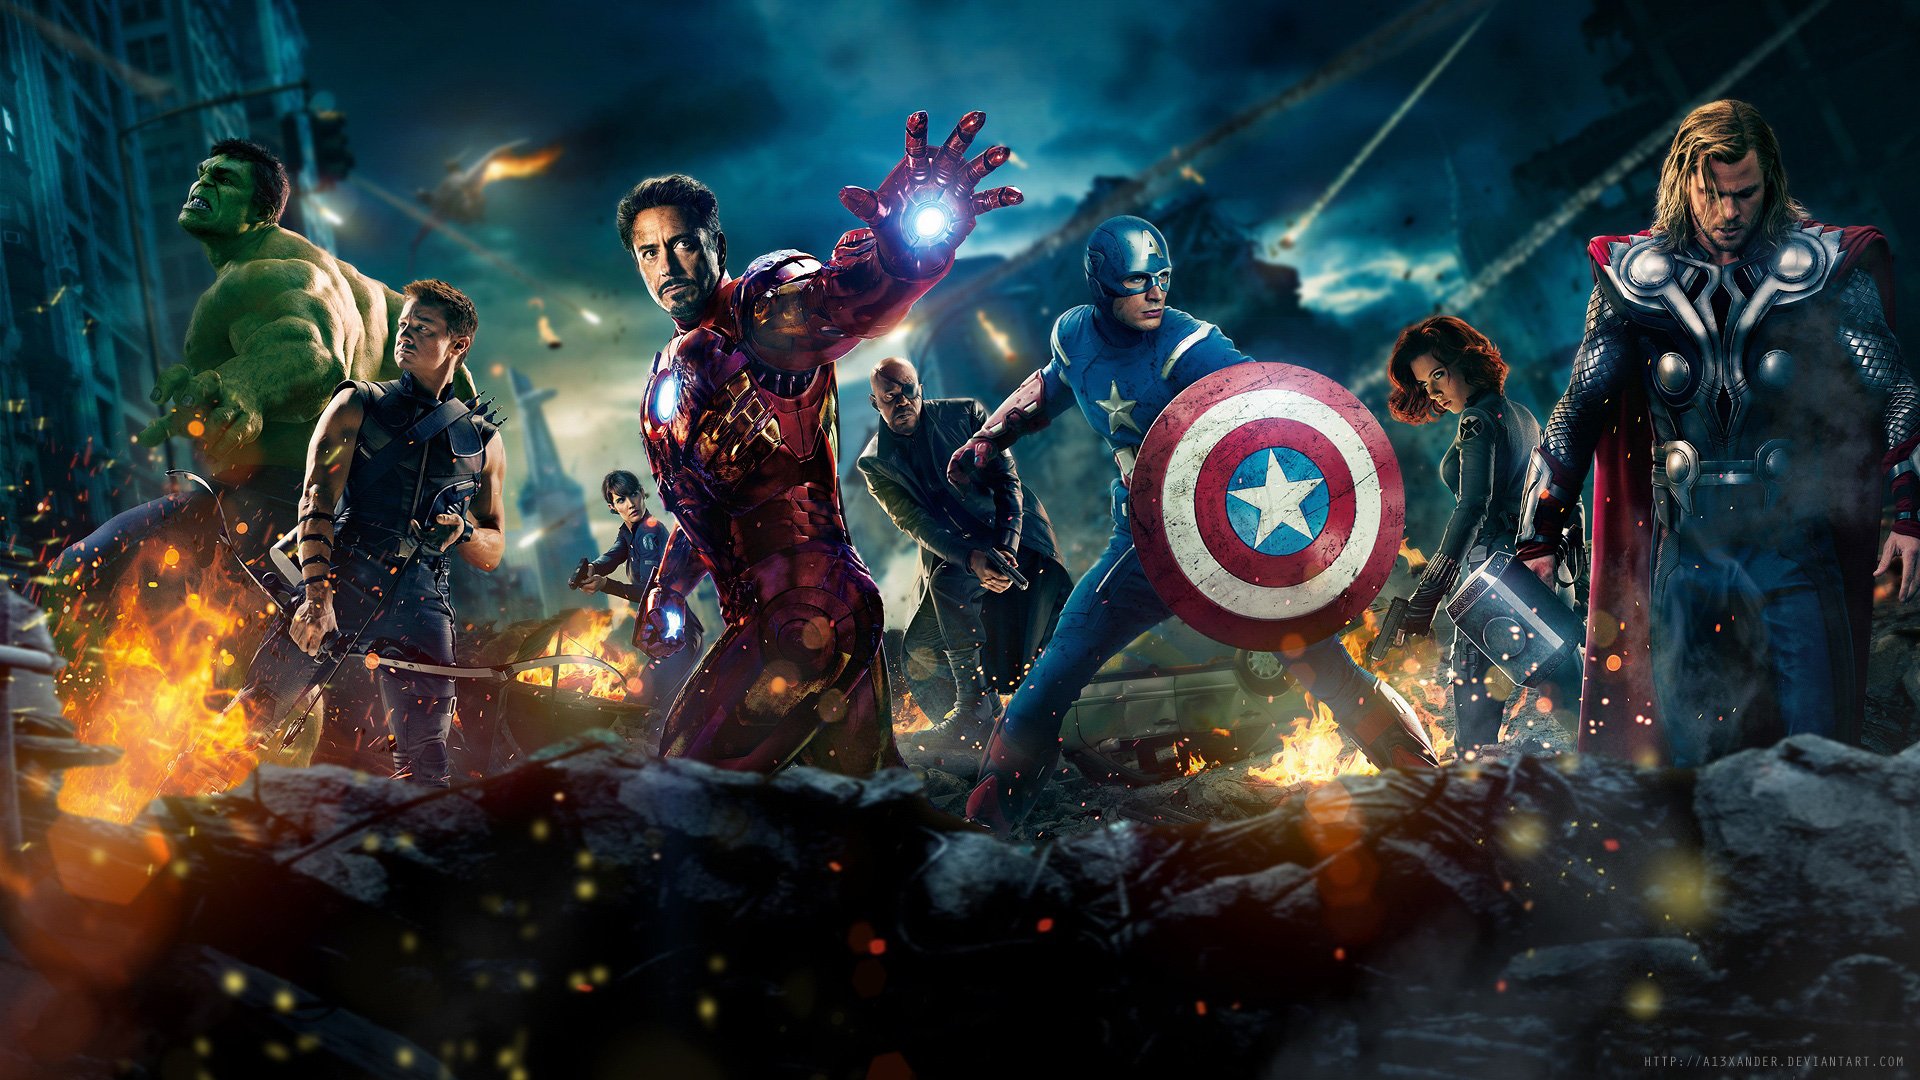 Iron Man Avengers the movie download full hd 1080p wallpaper movie